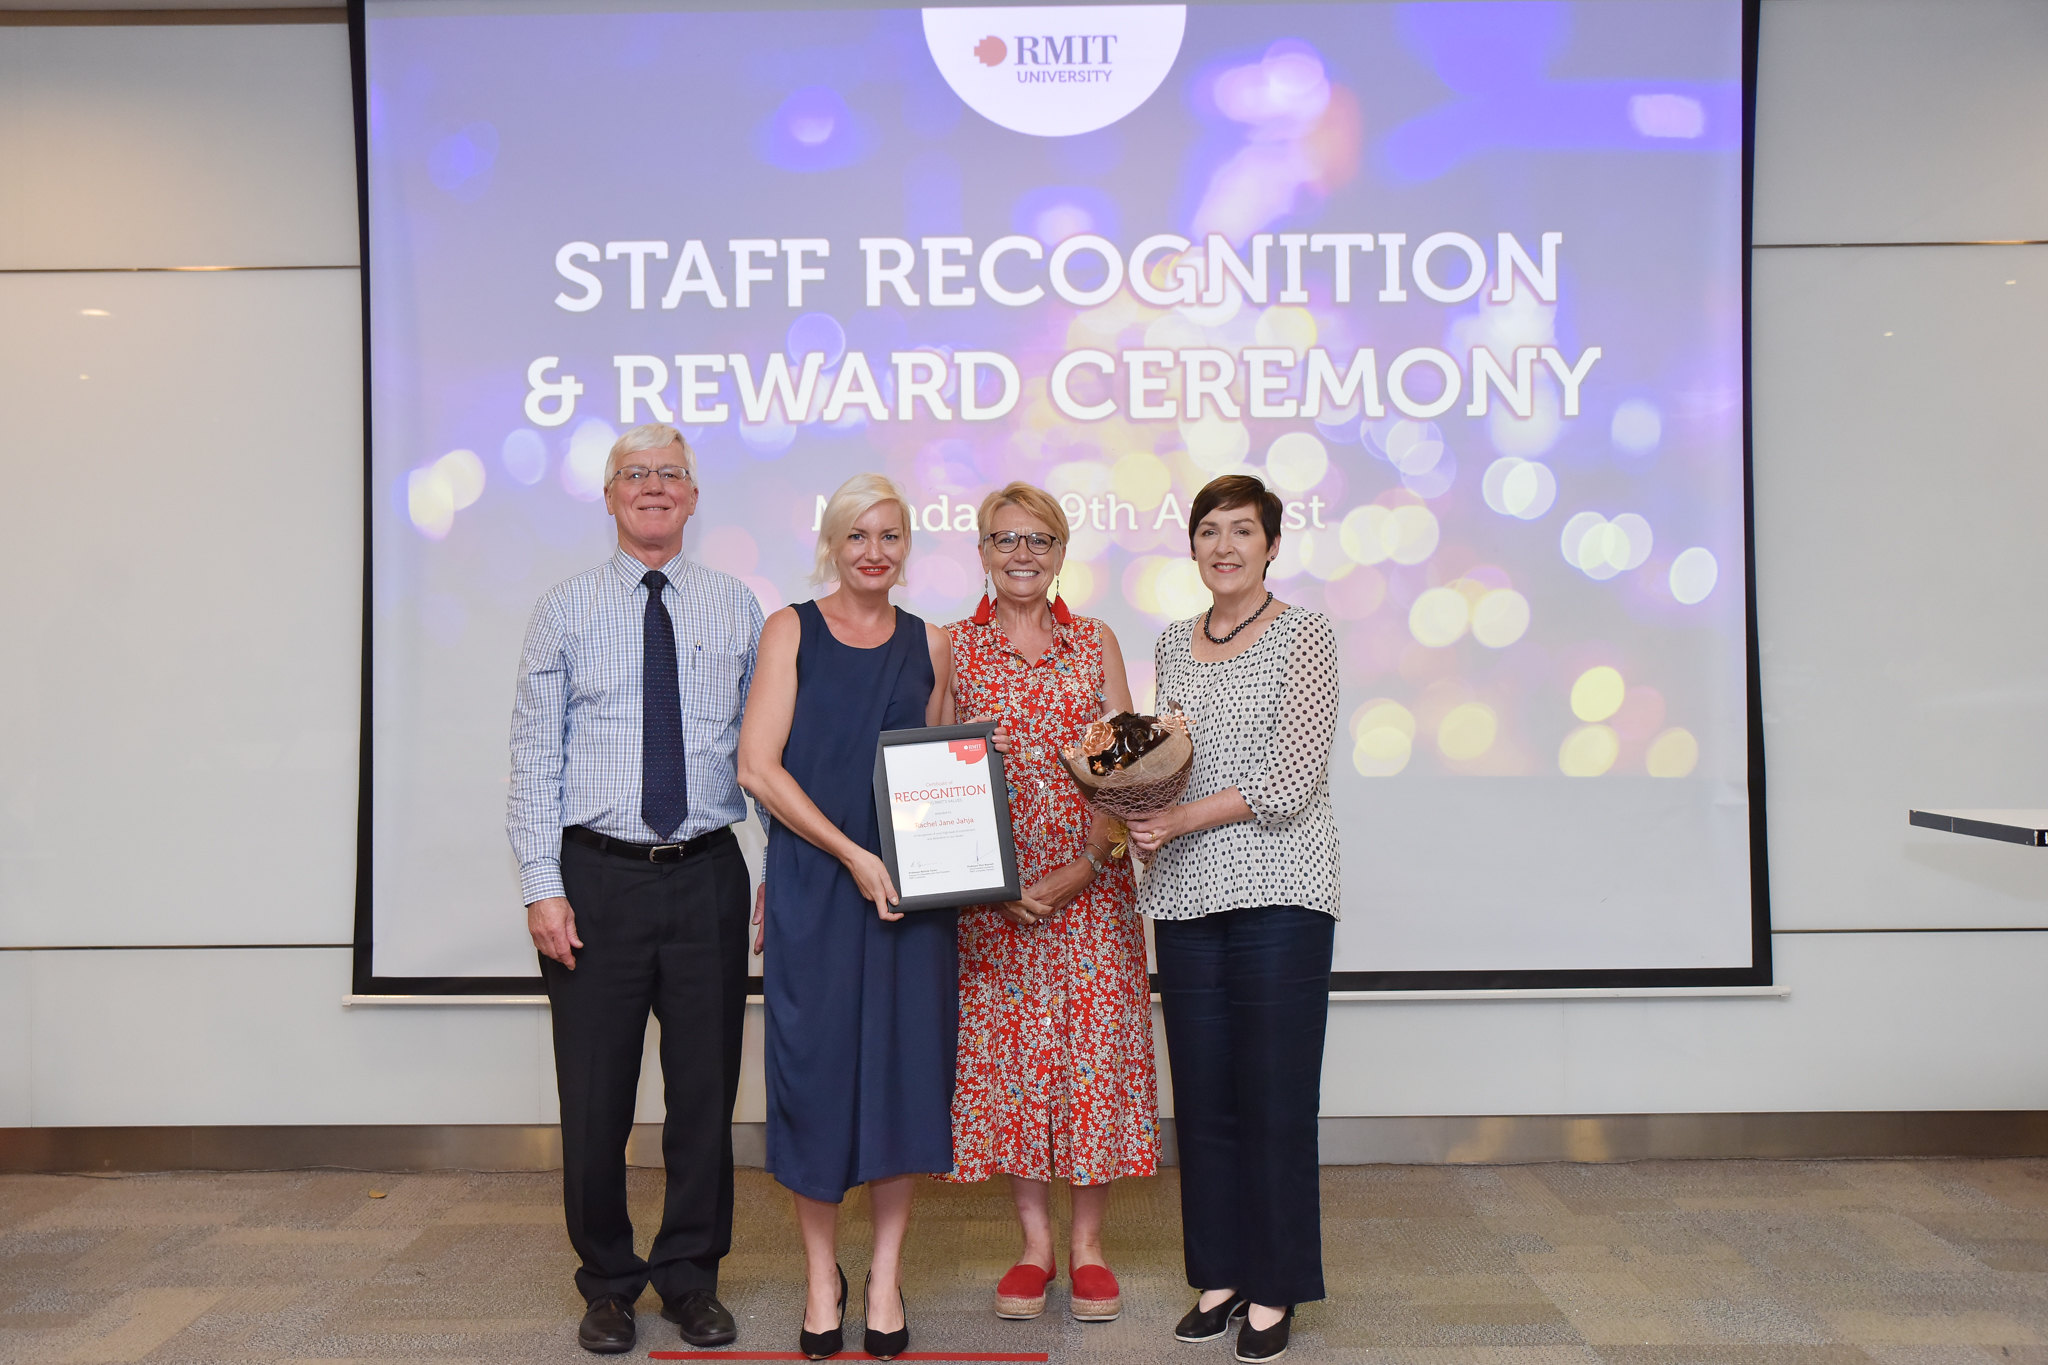 Associate Lecturer Rachel Jahja (second from left) accepts her Living with RMIT’s Values Award at RMIT’s Staff Recognition & Reward Ceremony. 